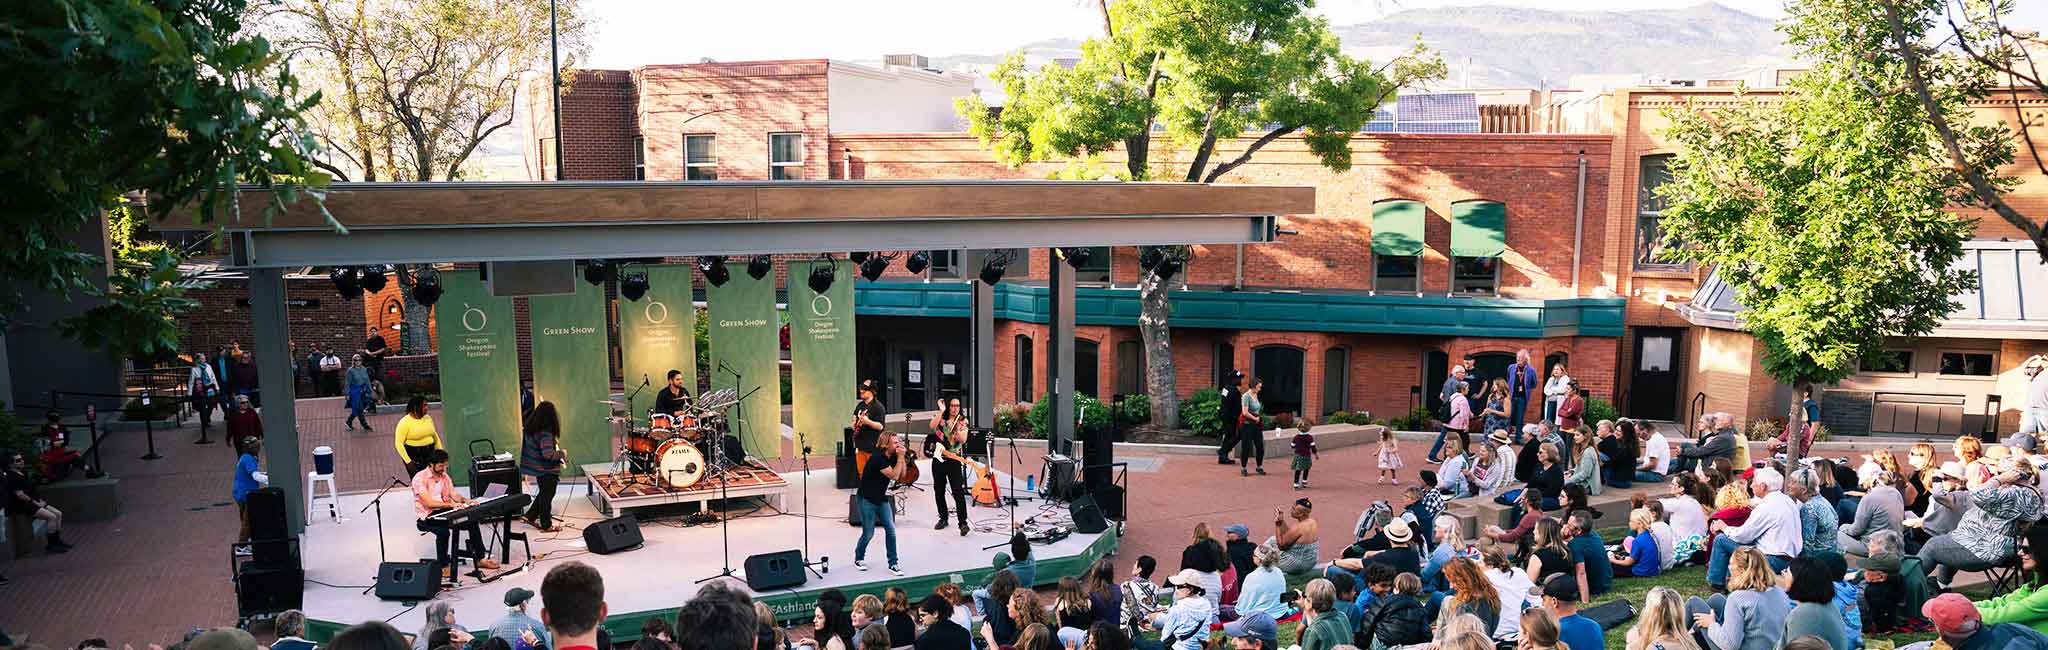 A band on an outdoor stage.